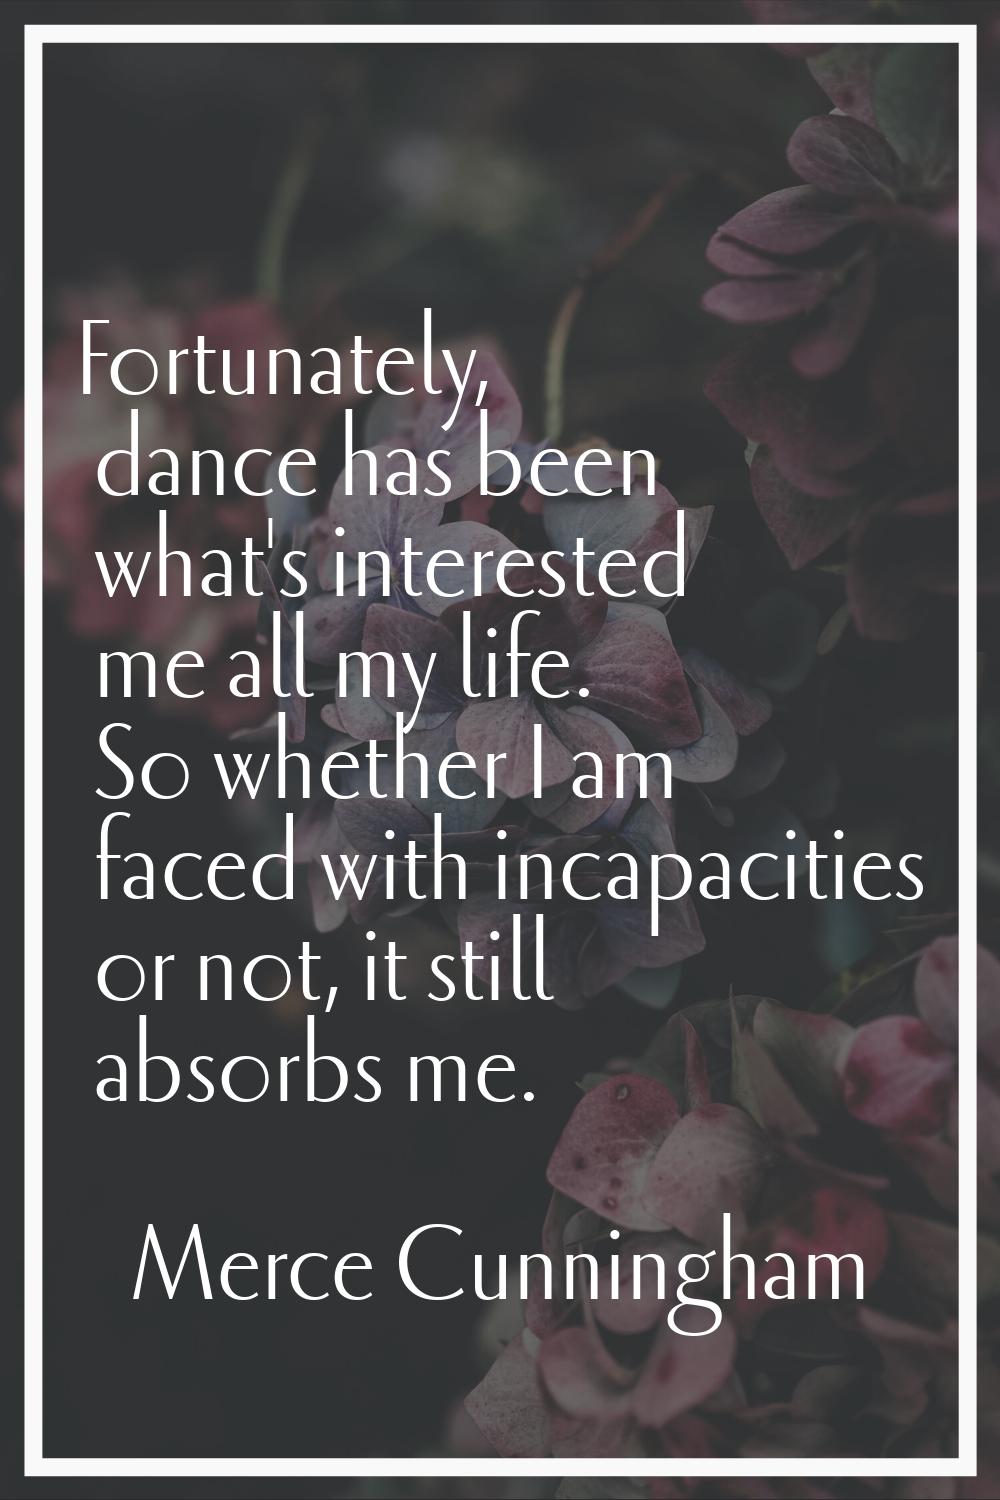 Fortunately, dance has been what's interested me all my life. So whether I am faced with incapaciti